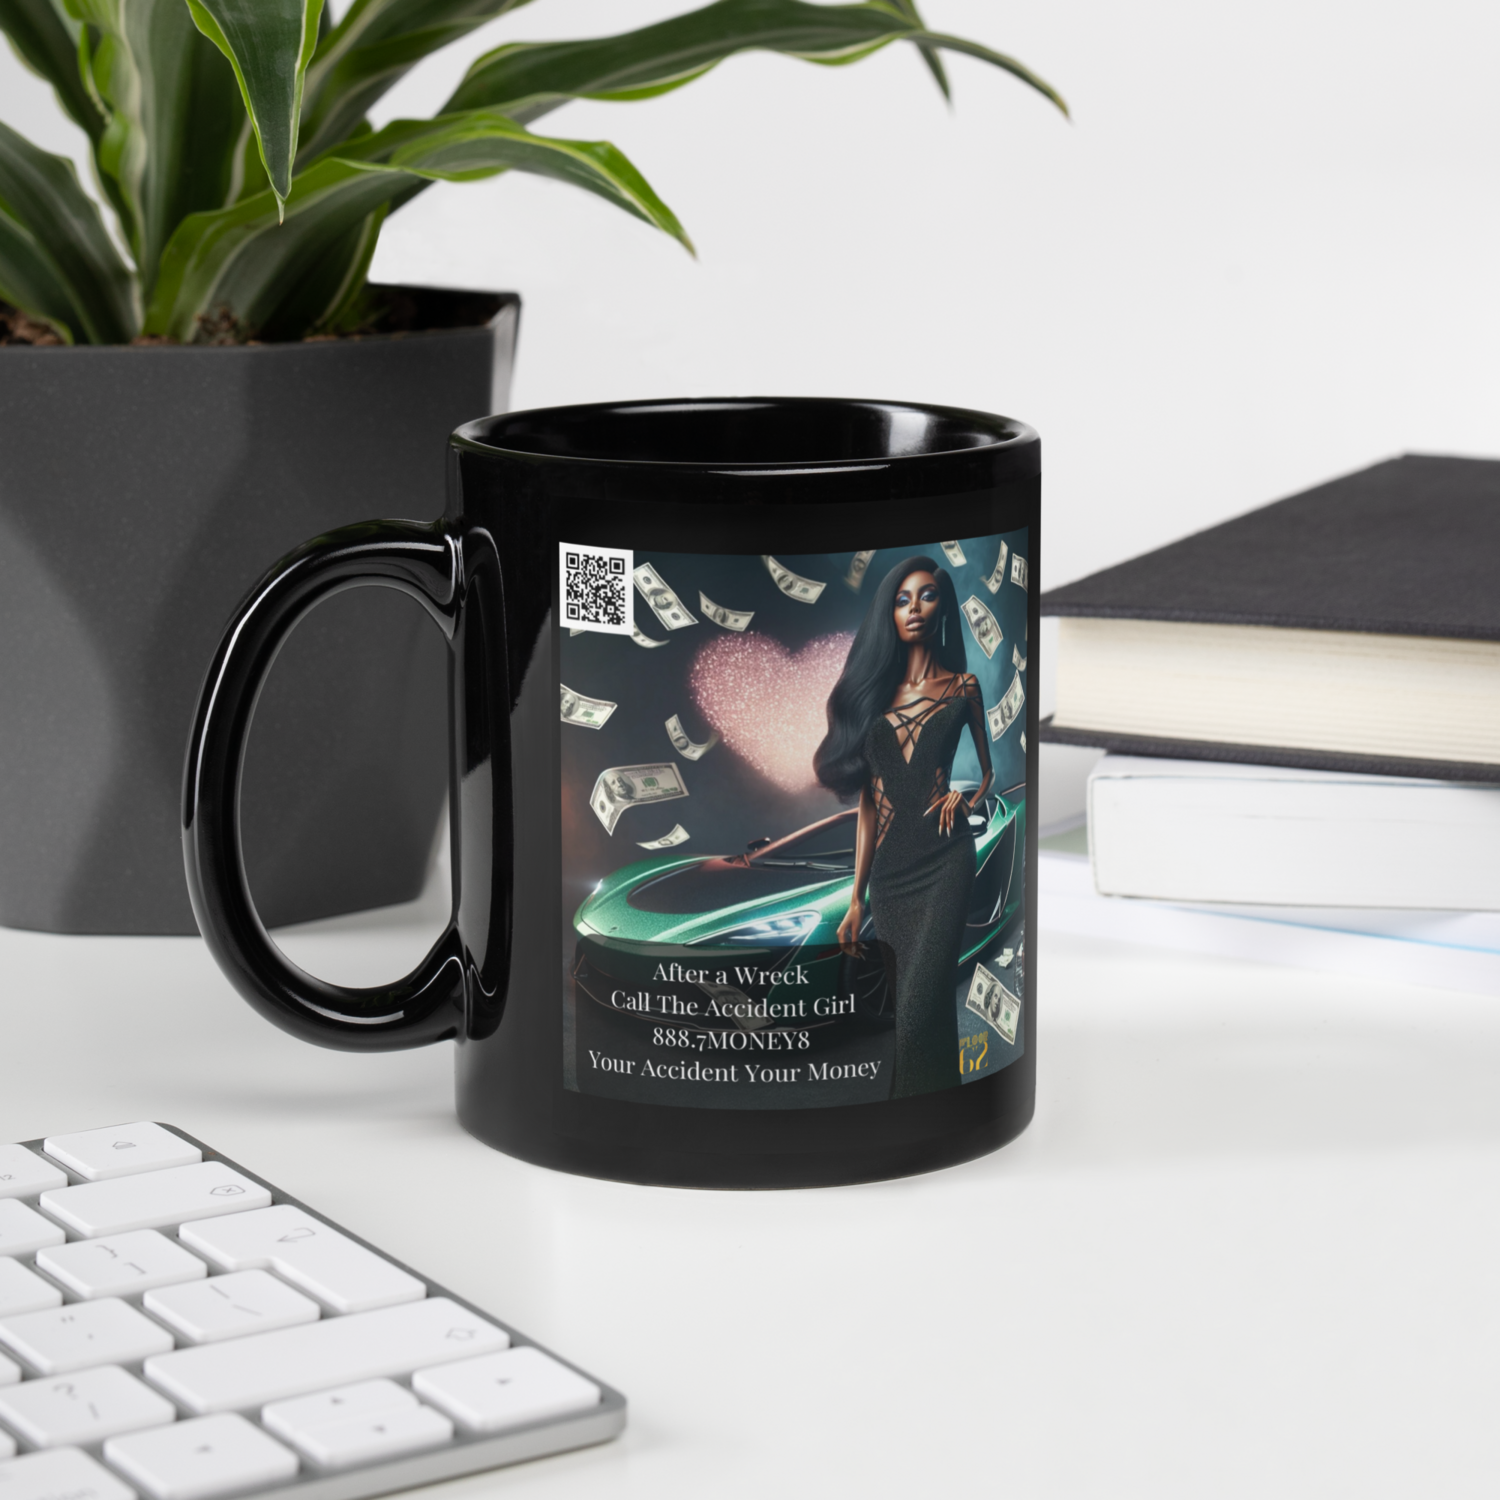 The "Your Accident Your Money" Black Glossy Mug